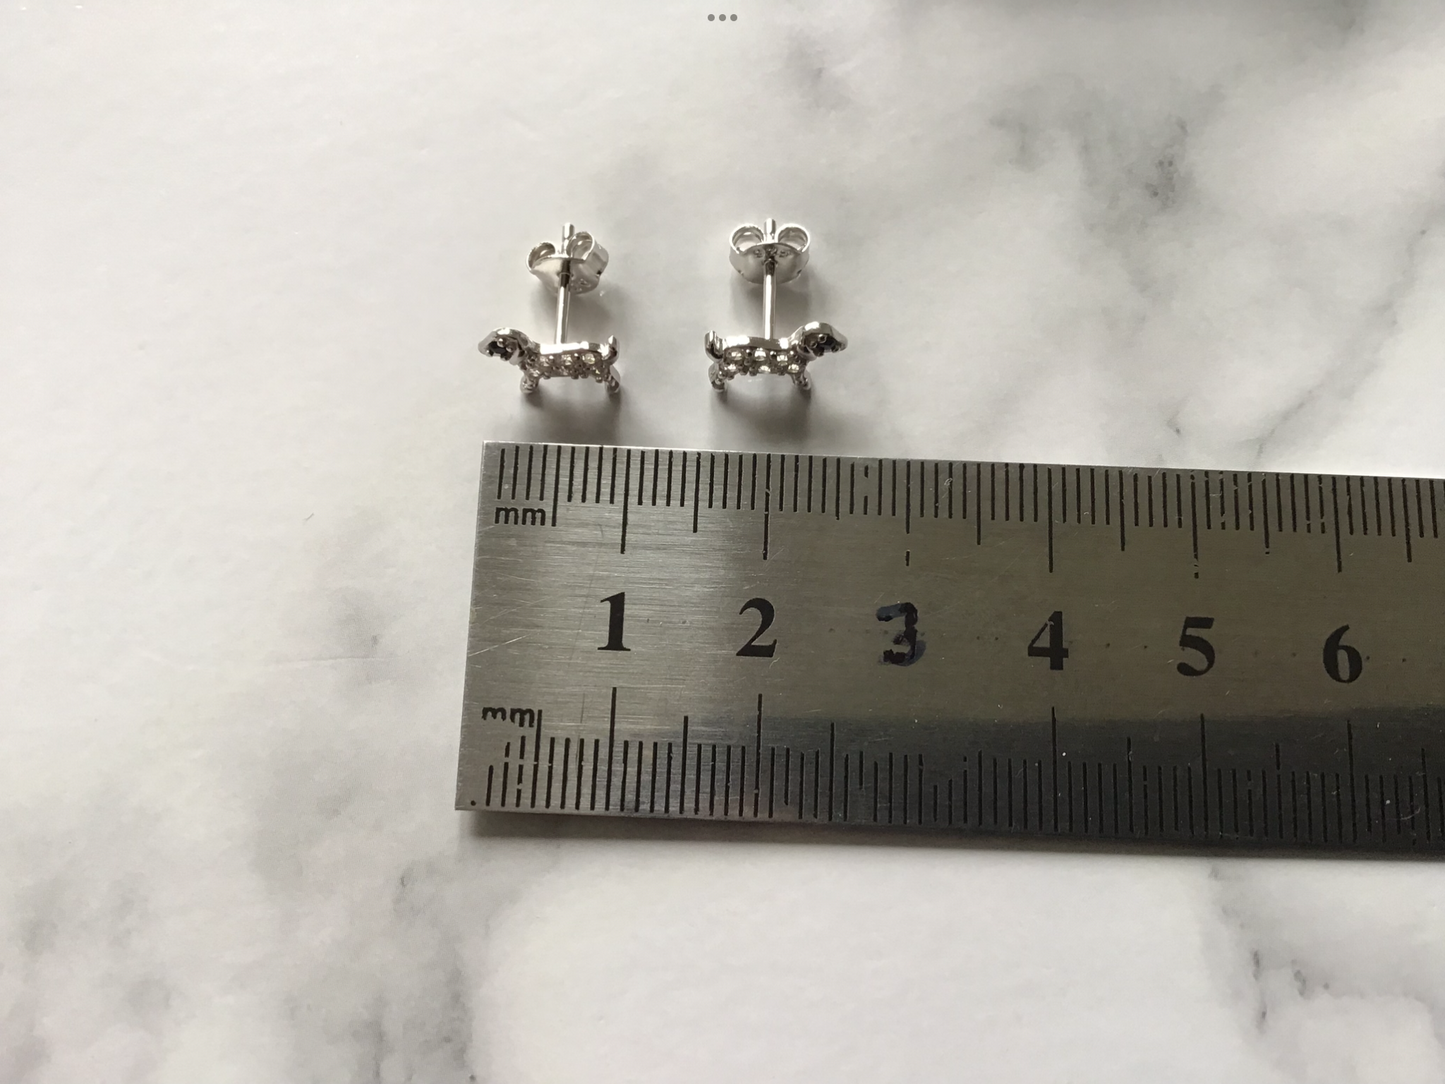 Genuine 925 Sterling Silver Pair of Dog Earrings with Sparkly CZ